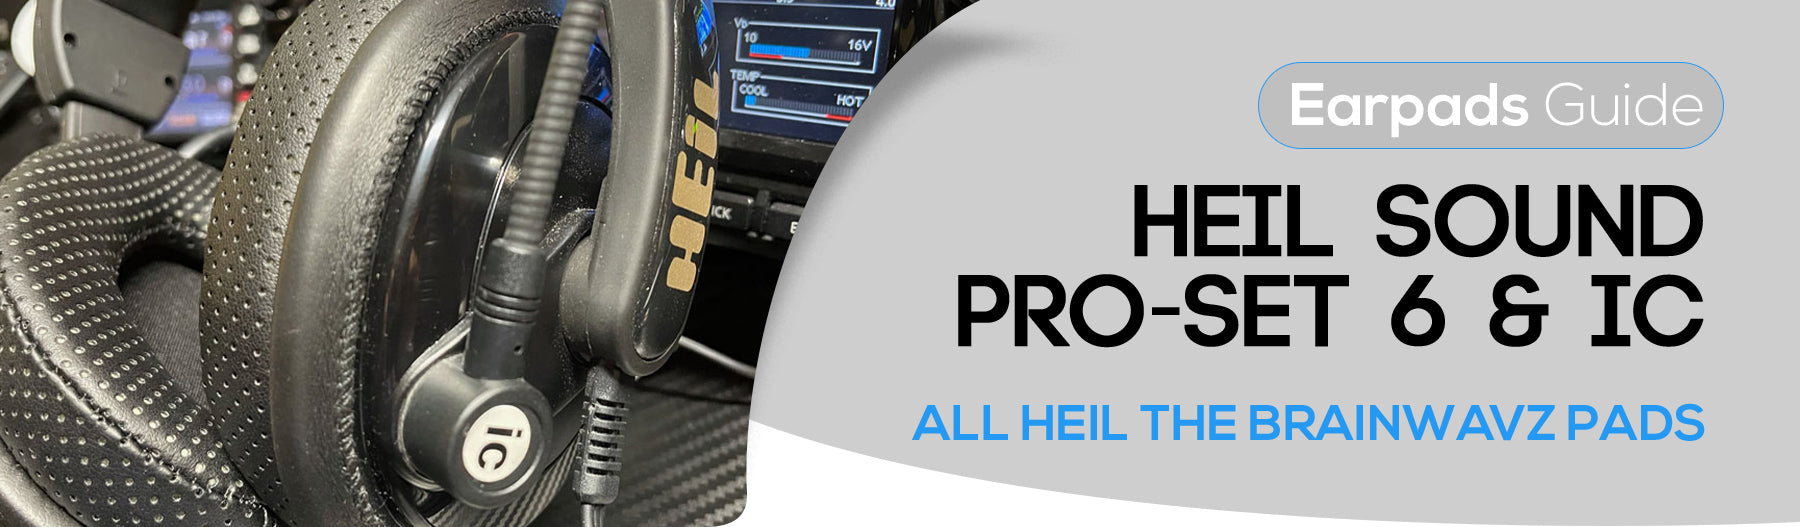 Replacement earpads for the Heil Sound Proset 6 & IC